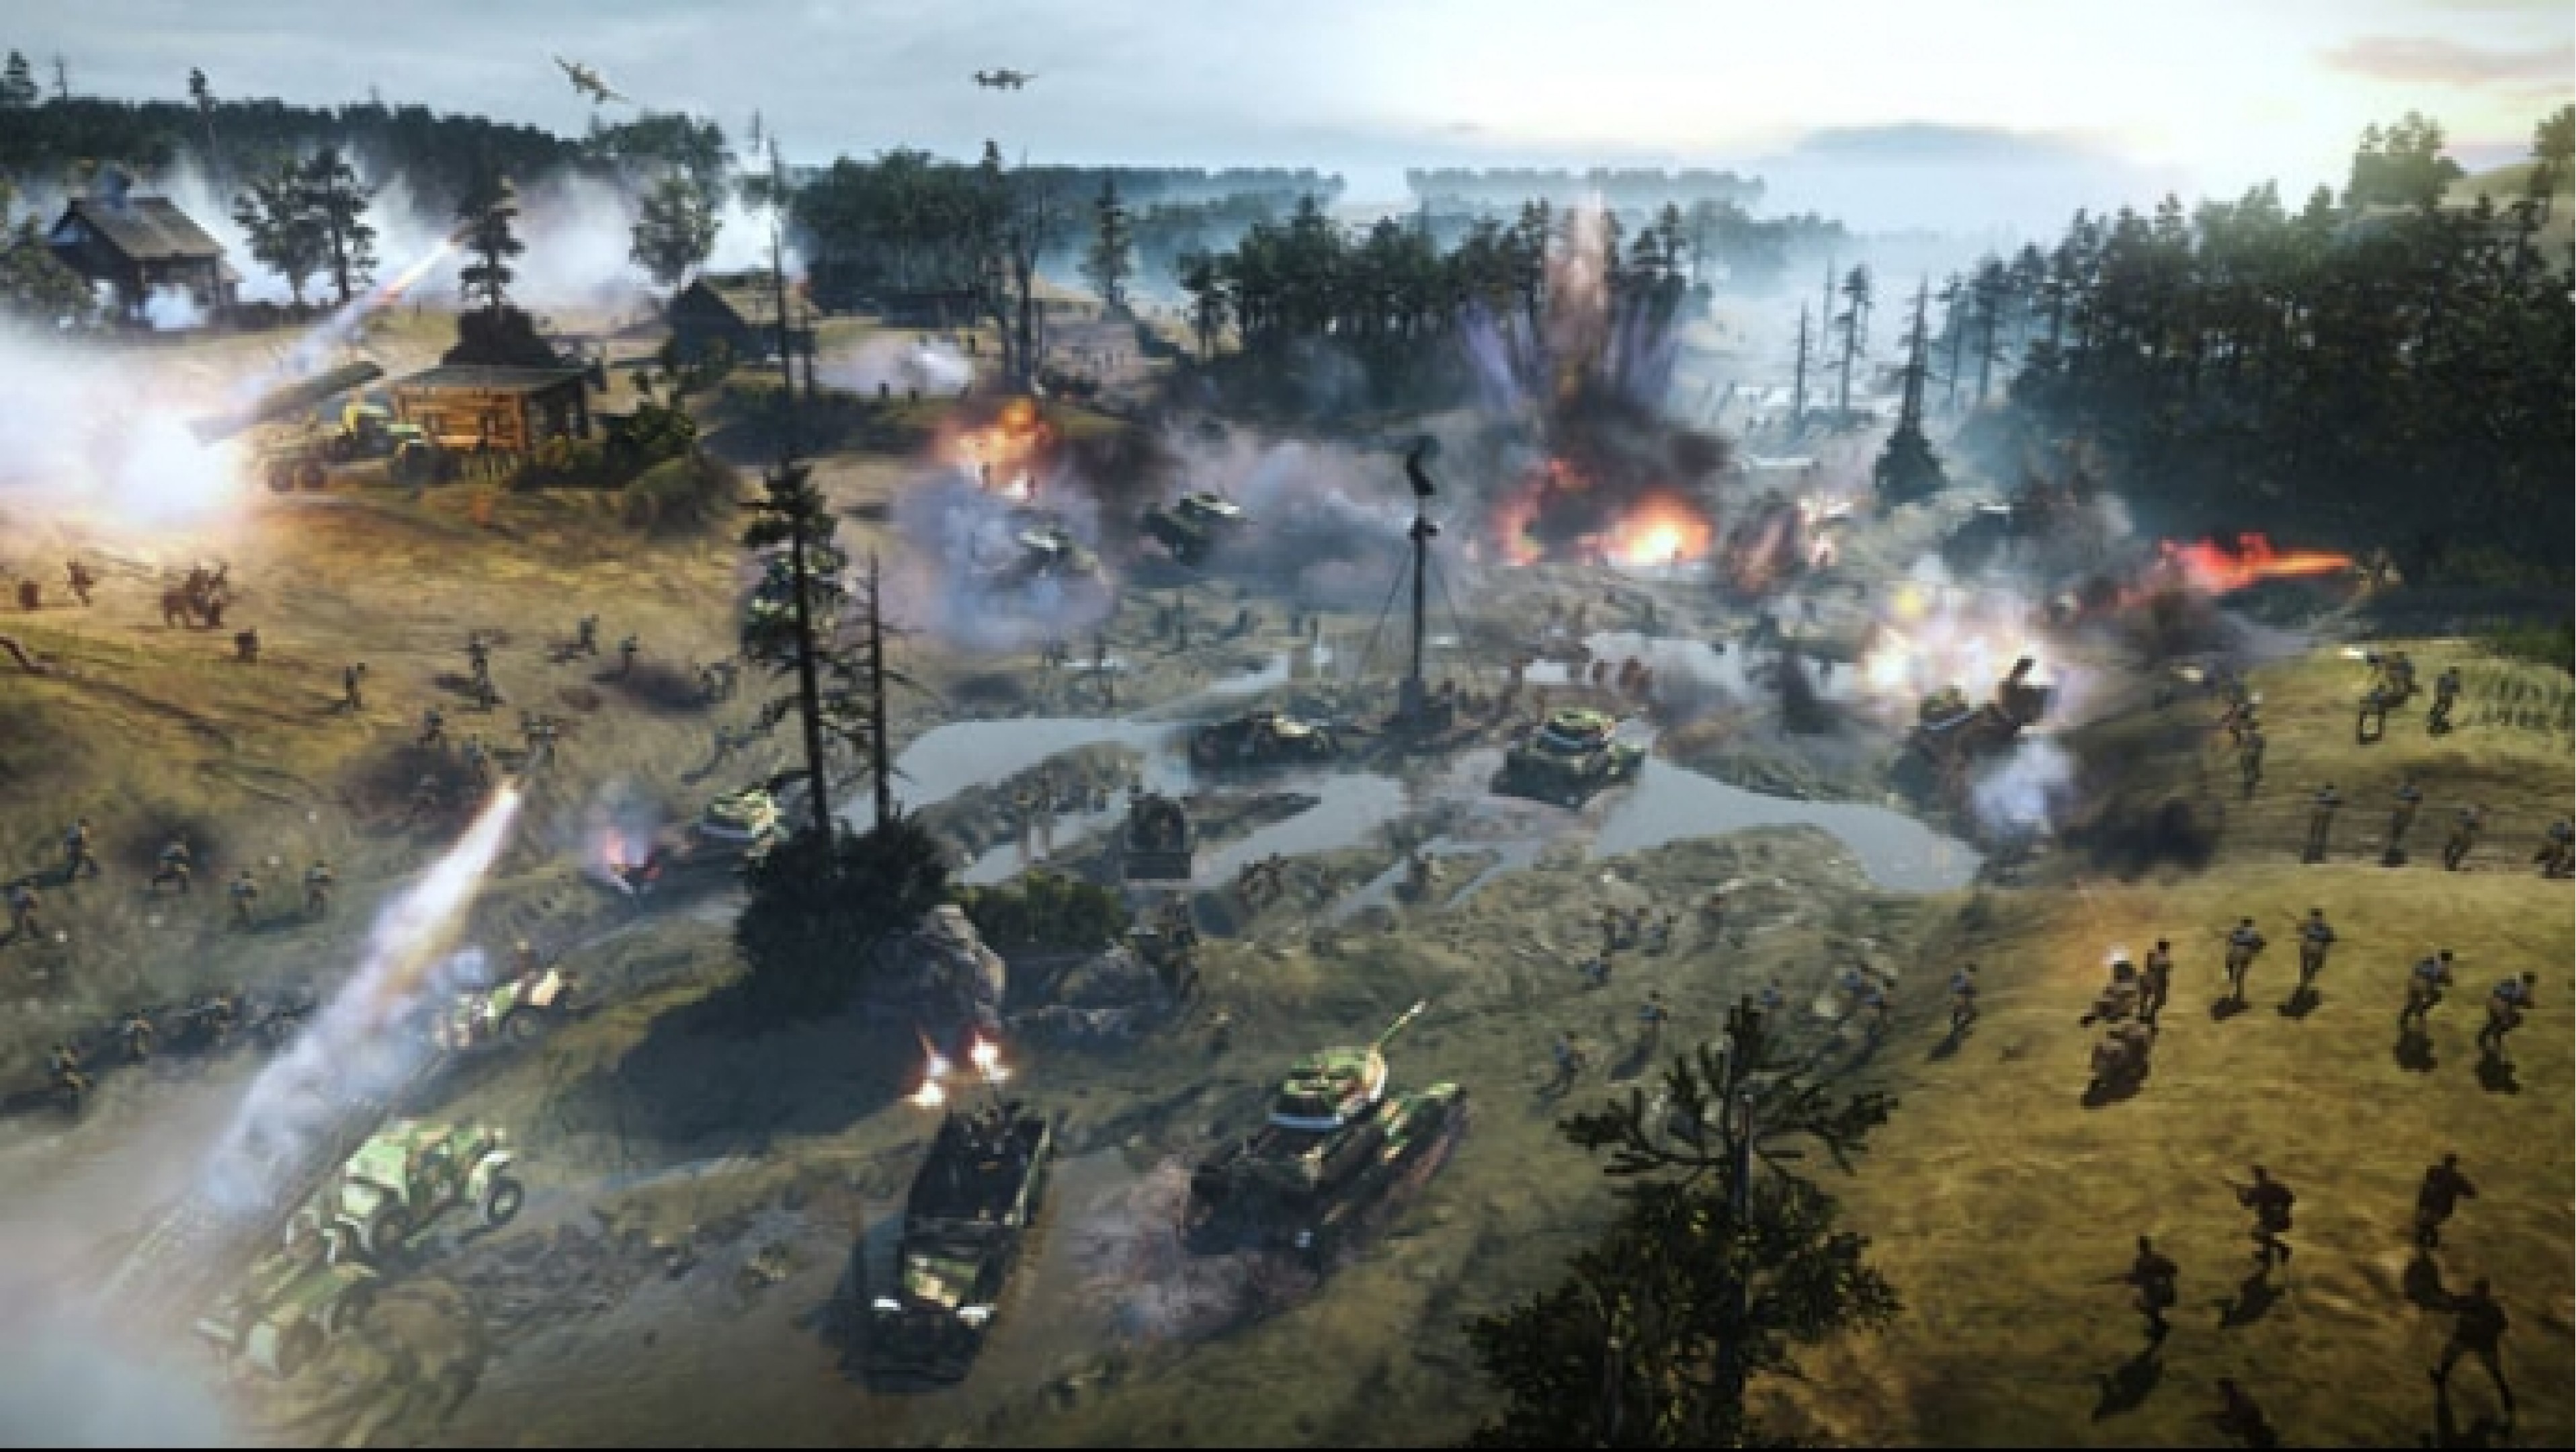 company of heroes 2 mac download free